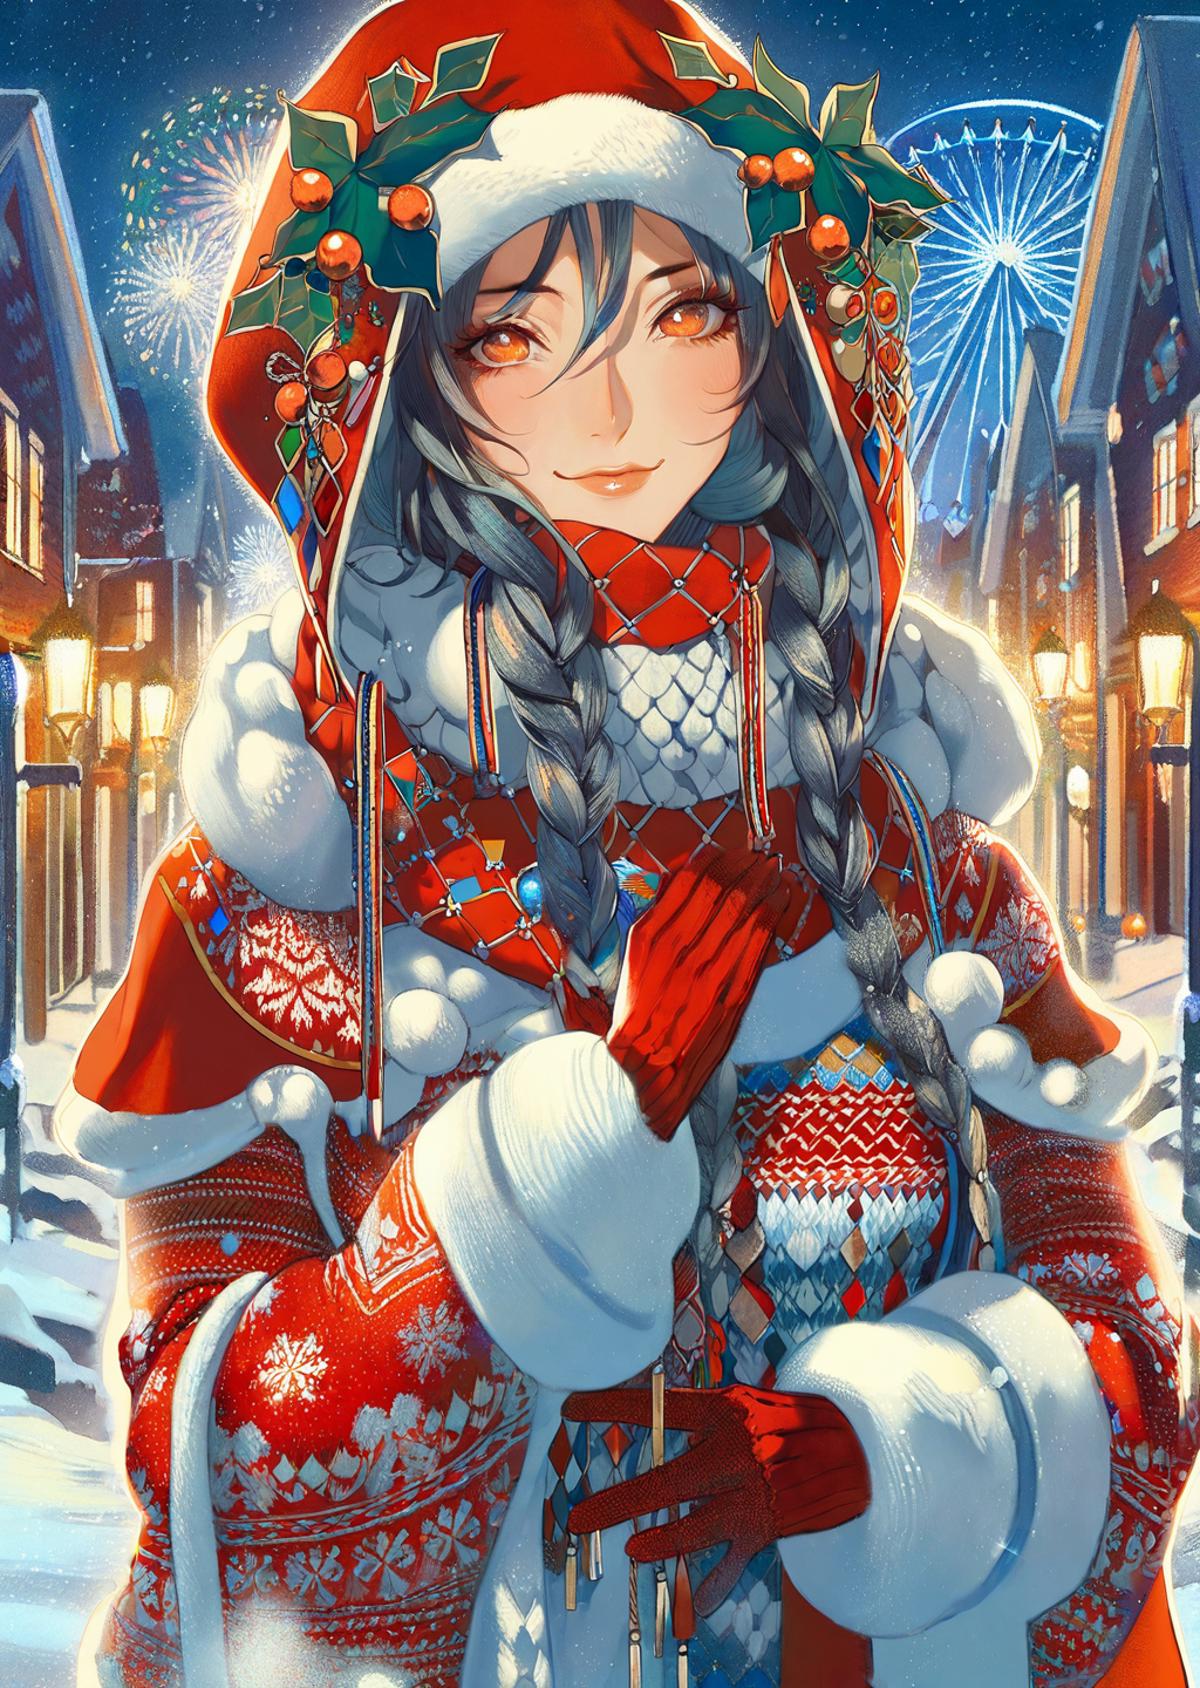 A beautifully drawn anime girl in a festive outfit.